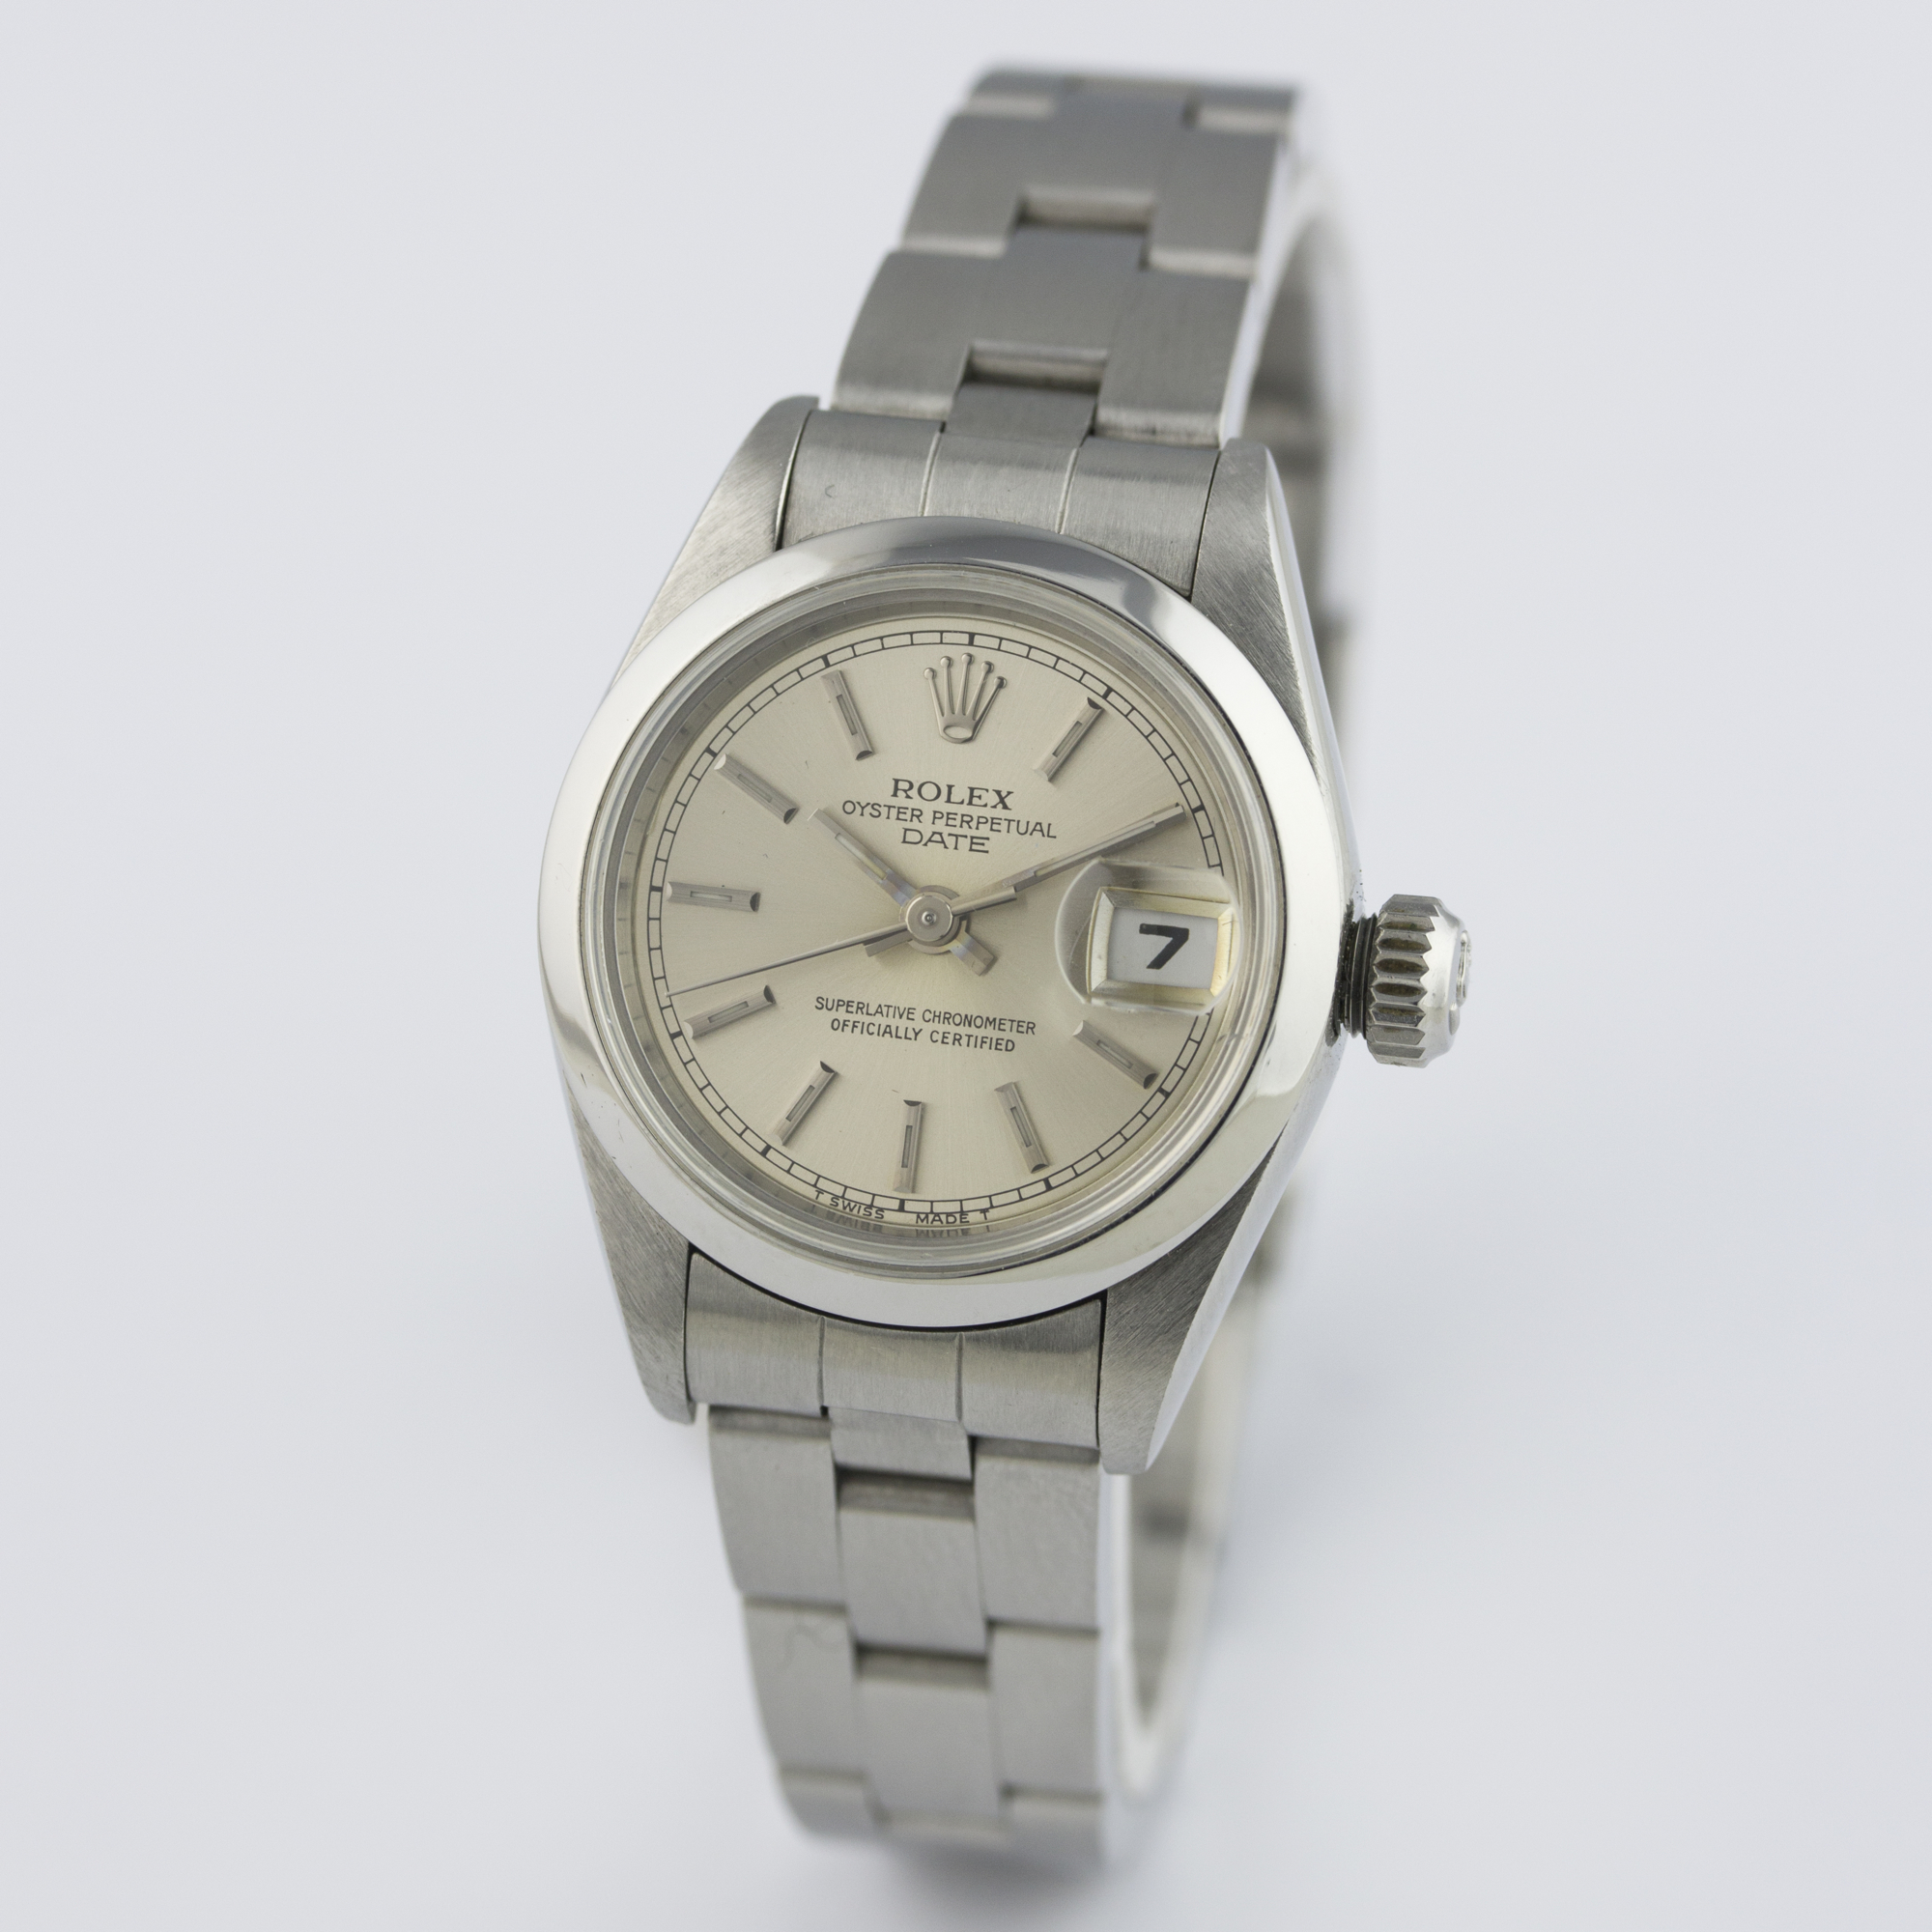 A LADIES STAINLESS STEEL ROLEX OYSTER PERPETUAL DATE BRACELET WATCH CIRCA 1993, REF. 69160 D: Silver - Image 2 of 9